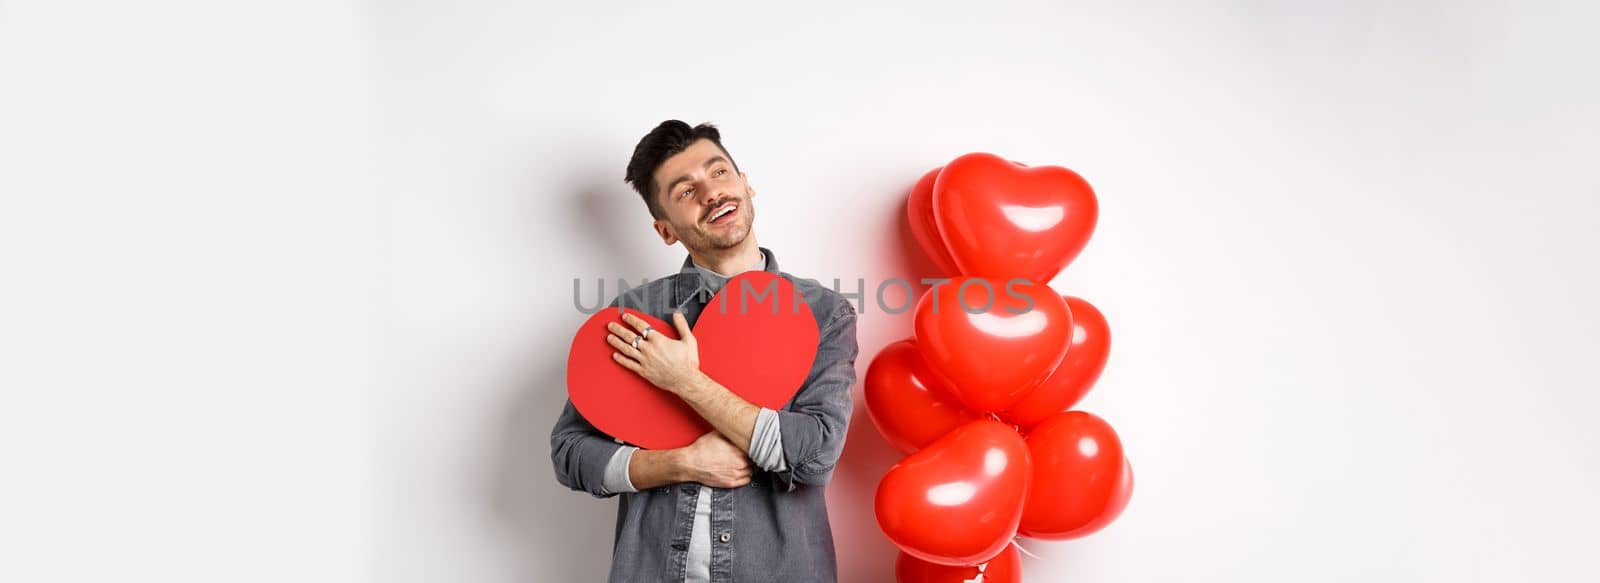 Romantic man hugging big red heart cutout and looking away dreamy, thinking of girlfriend and valentines day, imaging lover, standing on white background.